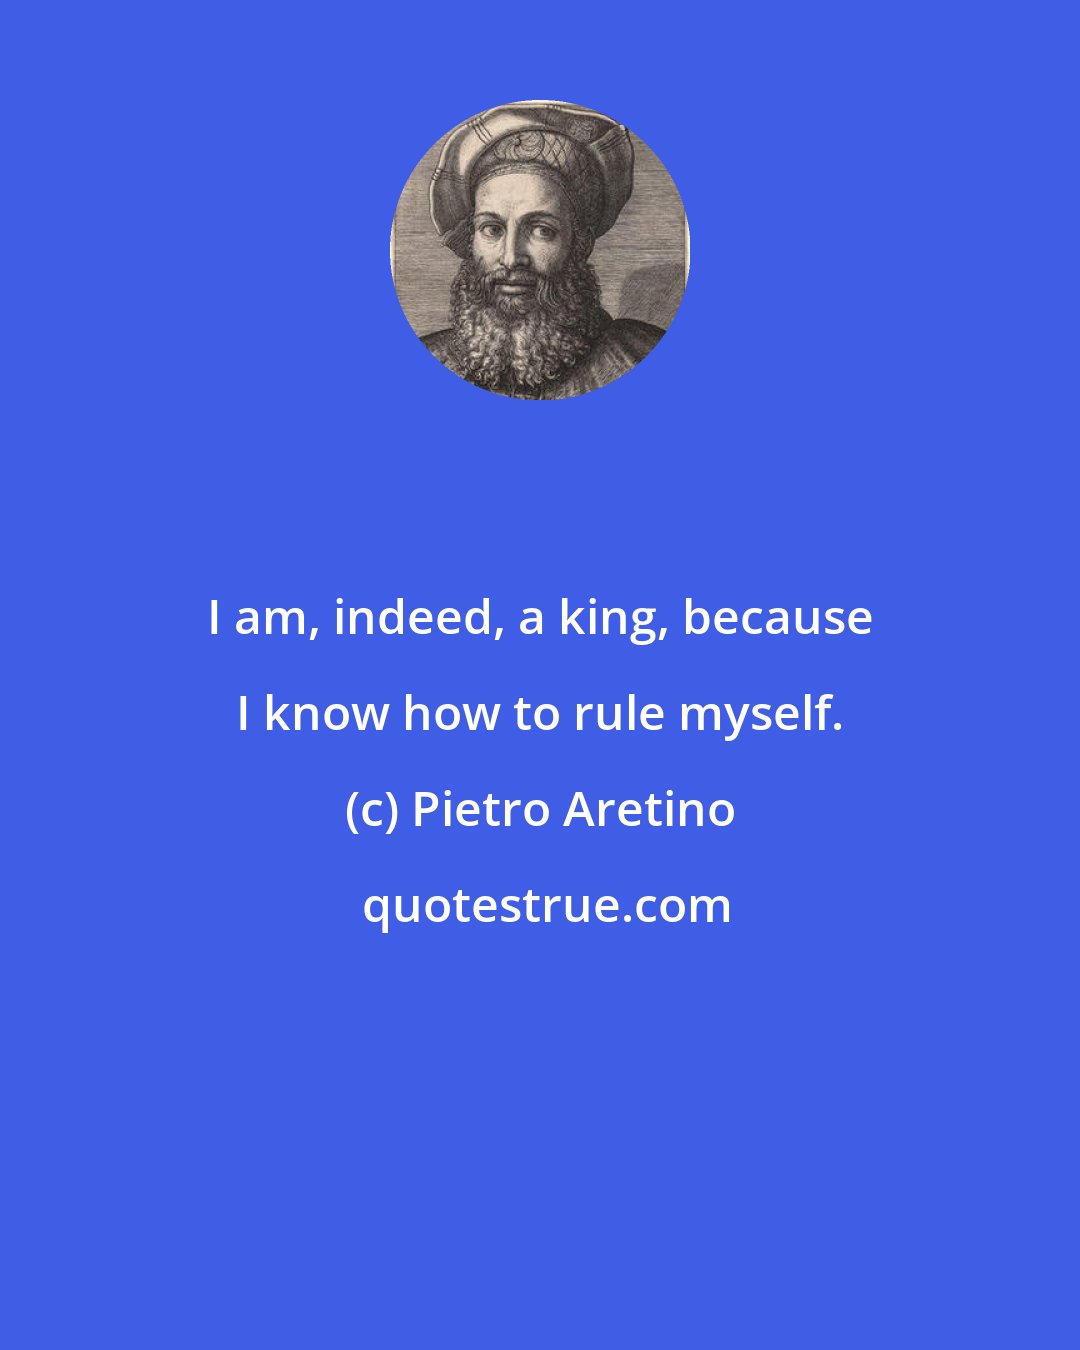 Pietro Aretino: I am, indeed, a king, because I know how to rule myself.